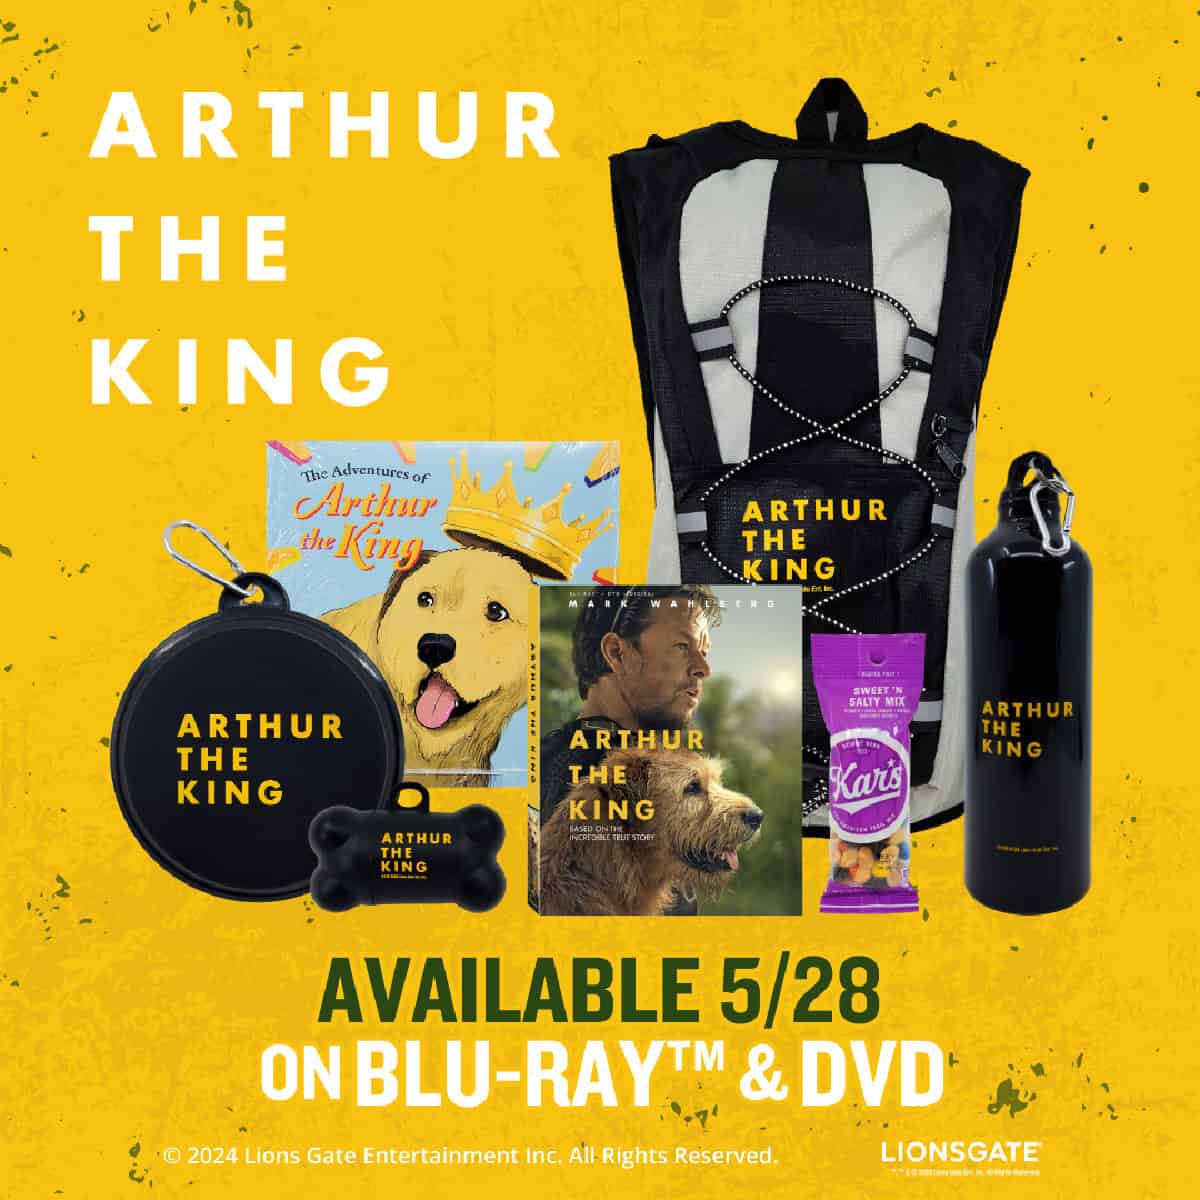 Arthur the King Prize Pack Giveaway